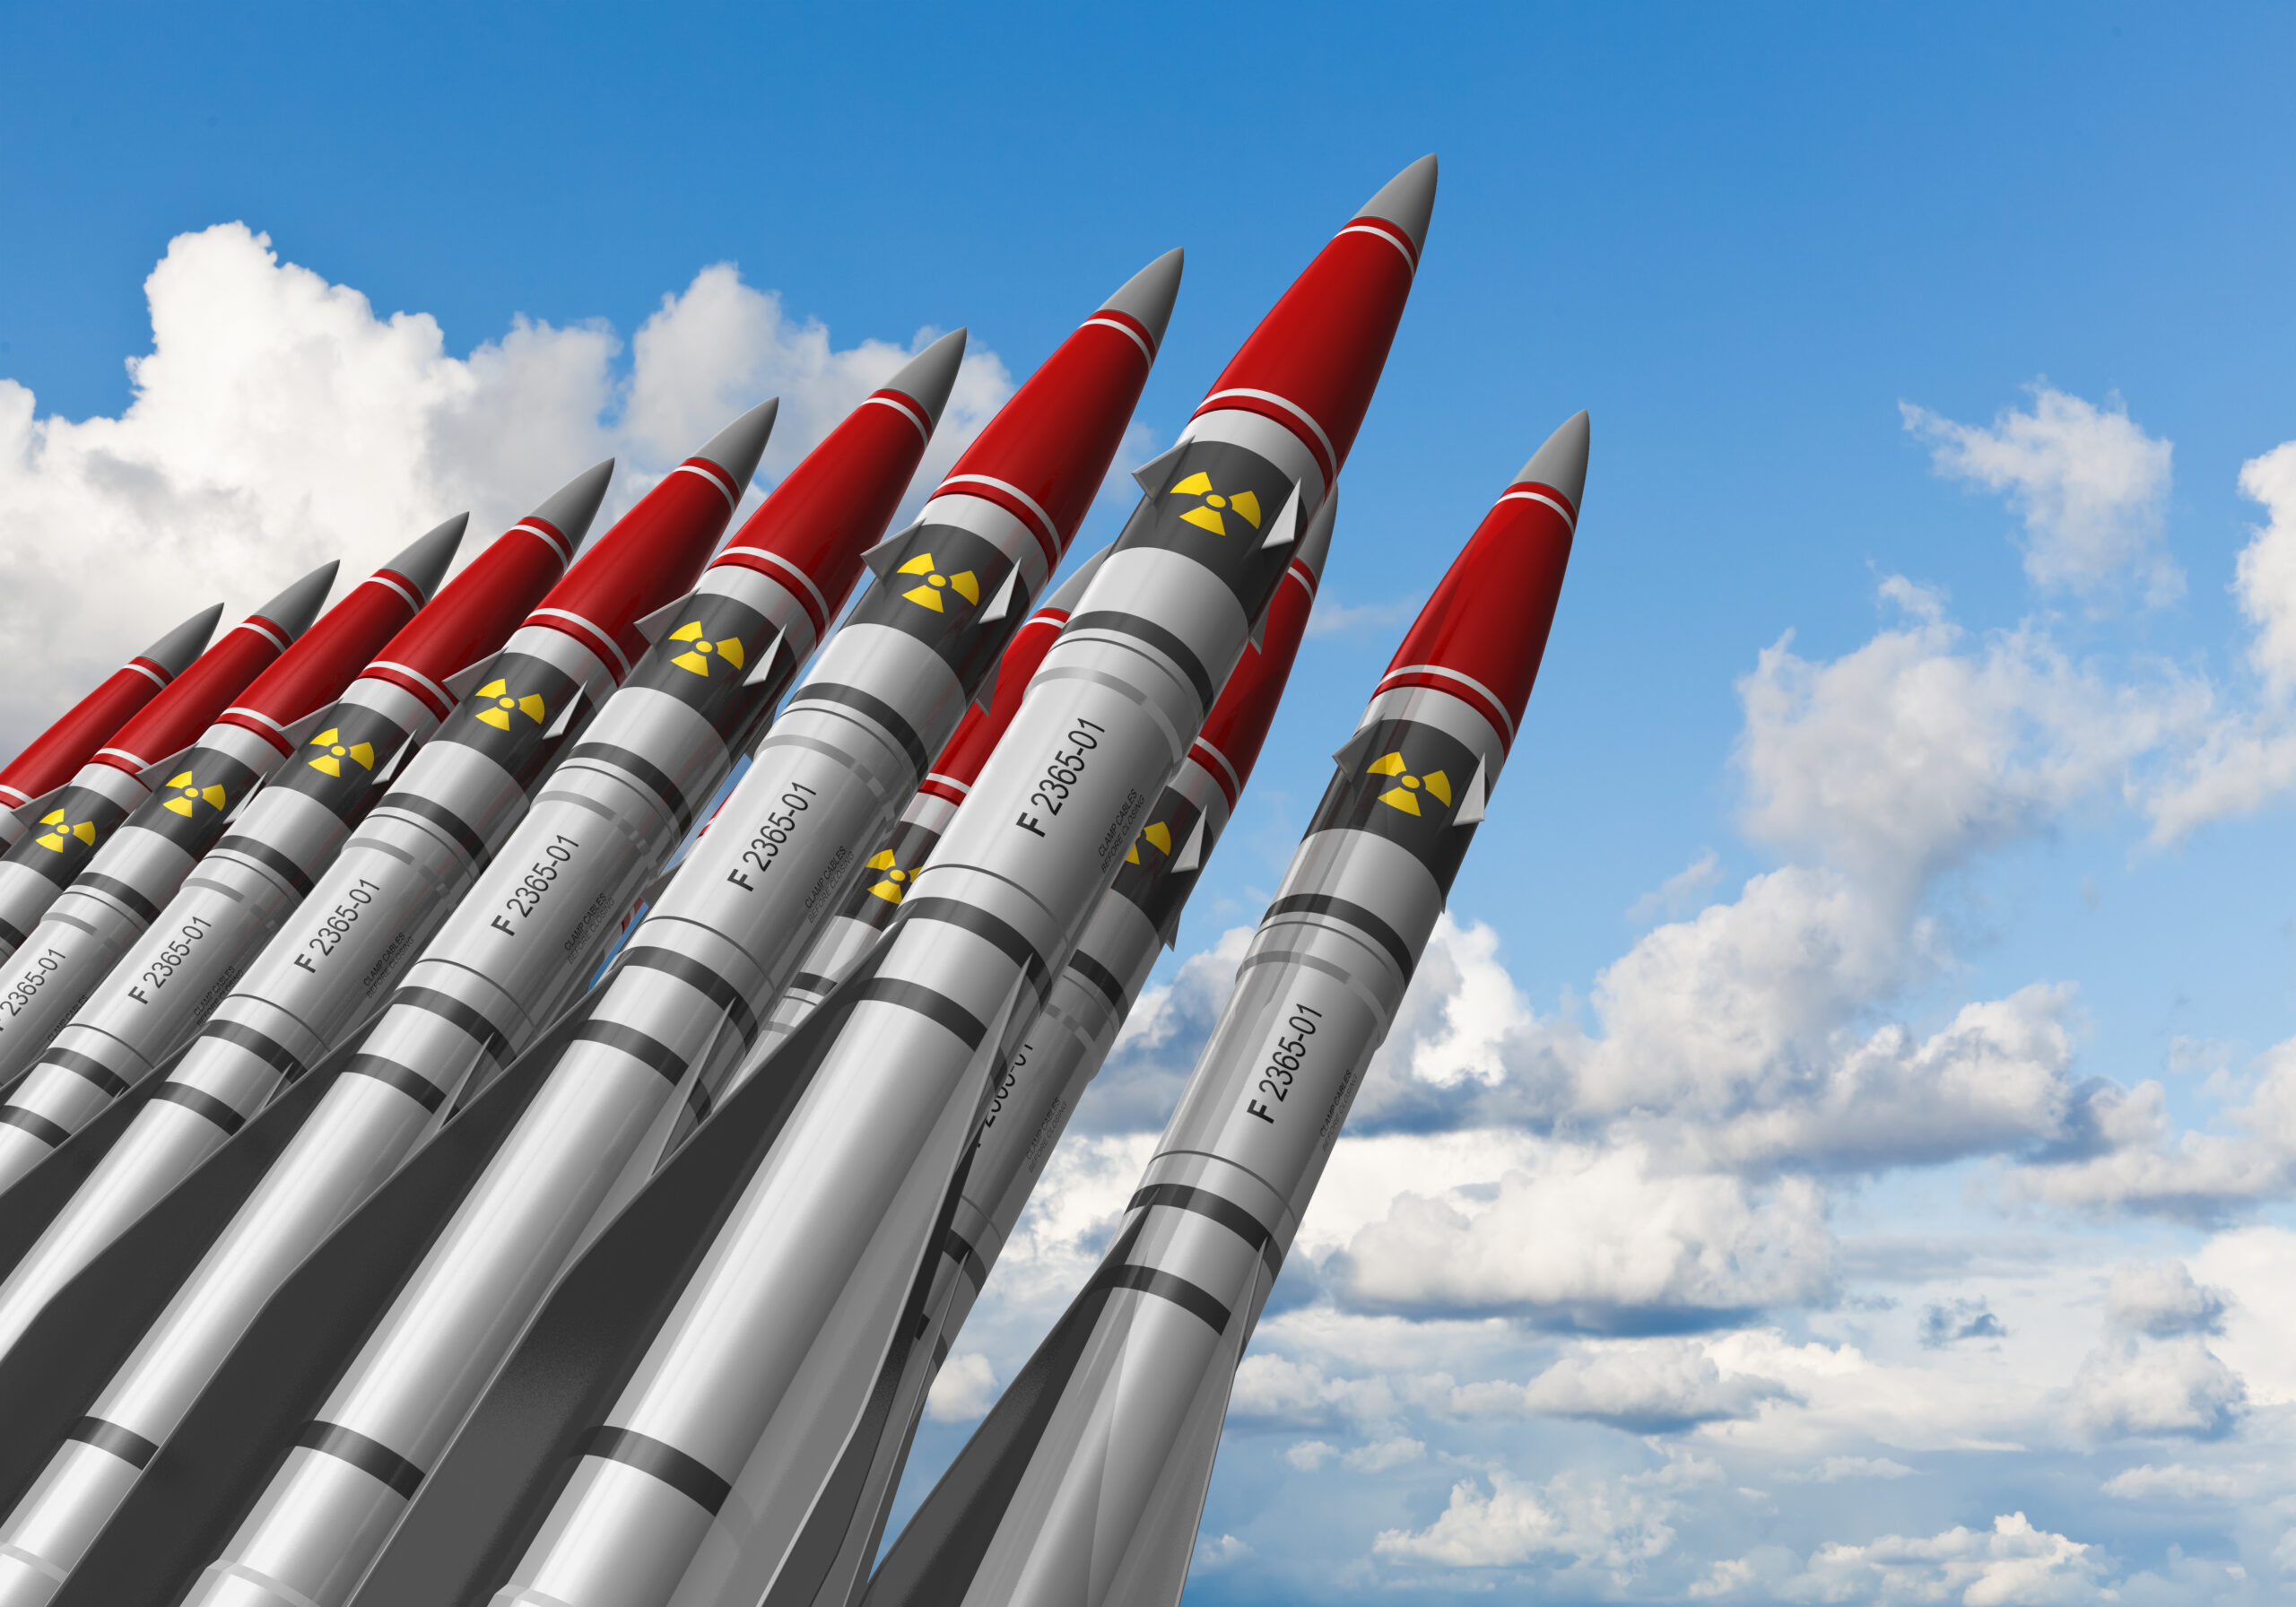 Row of heavy nuclear missiles against blue sky with clouds